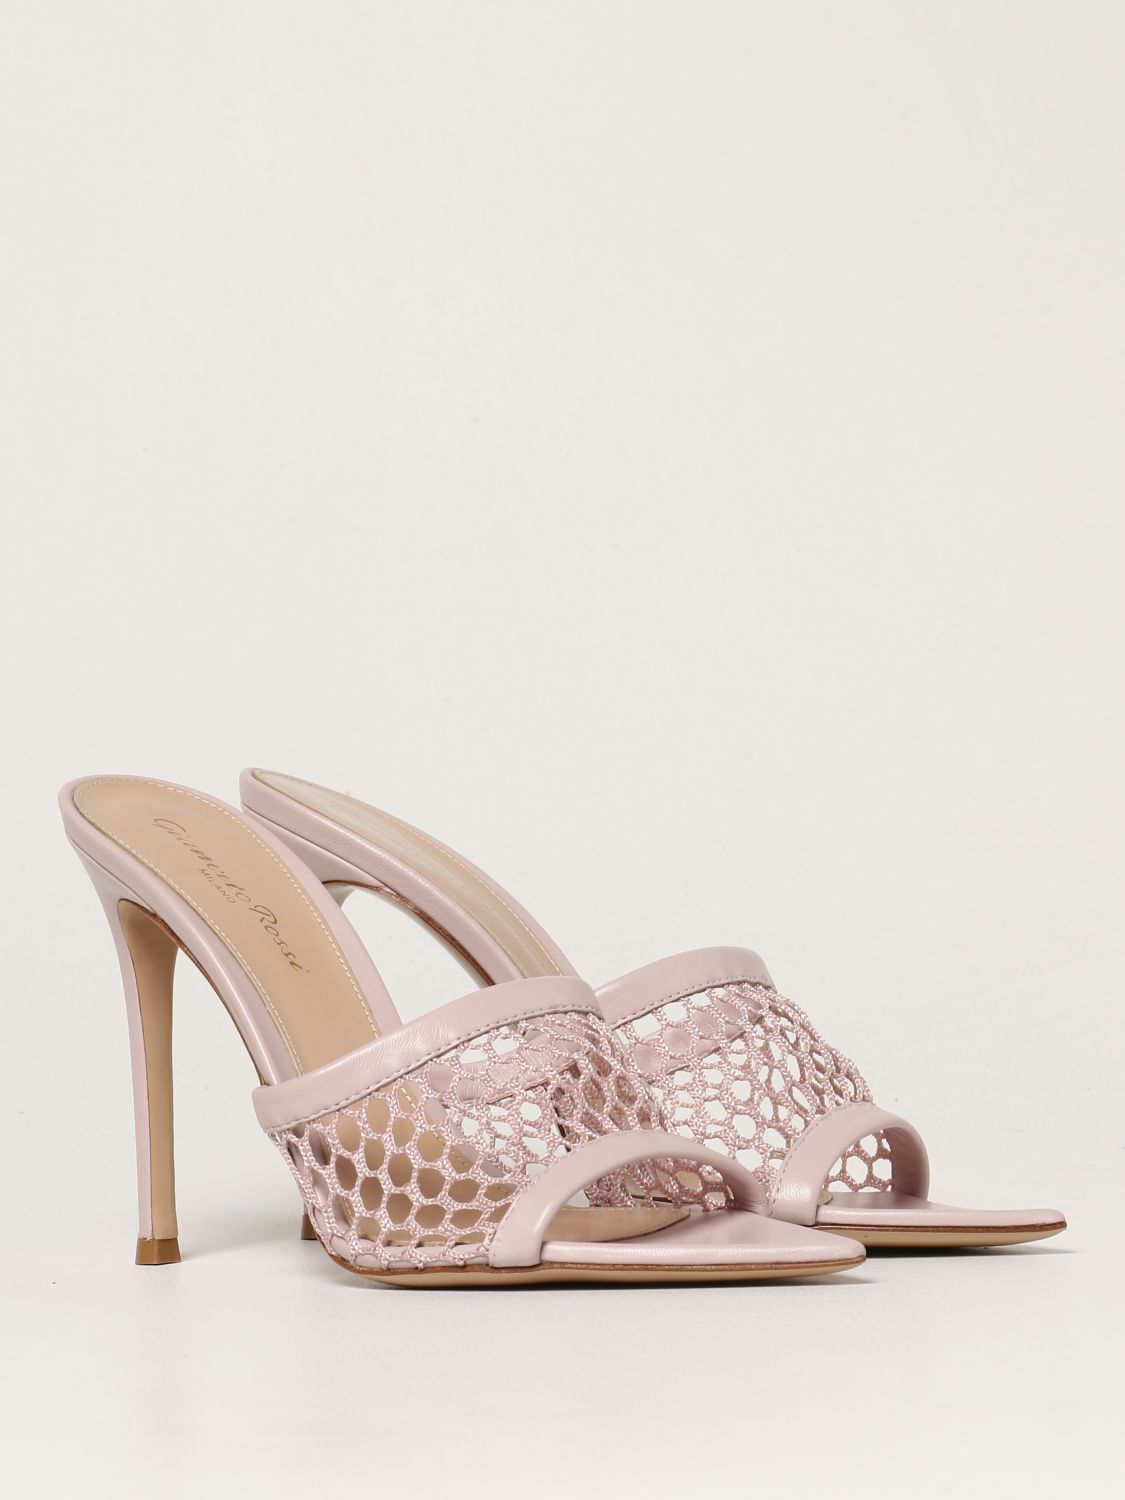 Sandales à talons Gianvito Rossi: Chaussures à talons femme Gianvito Rossi rose 2